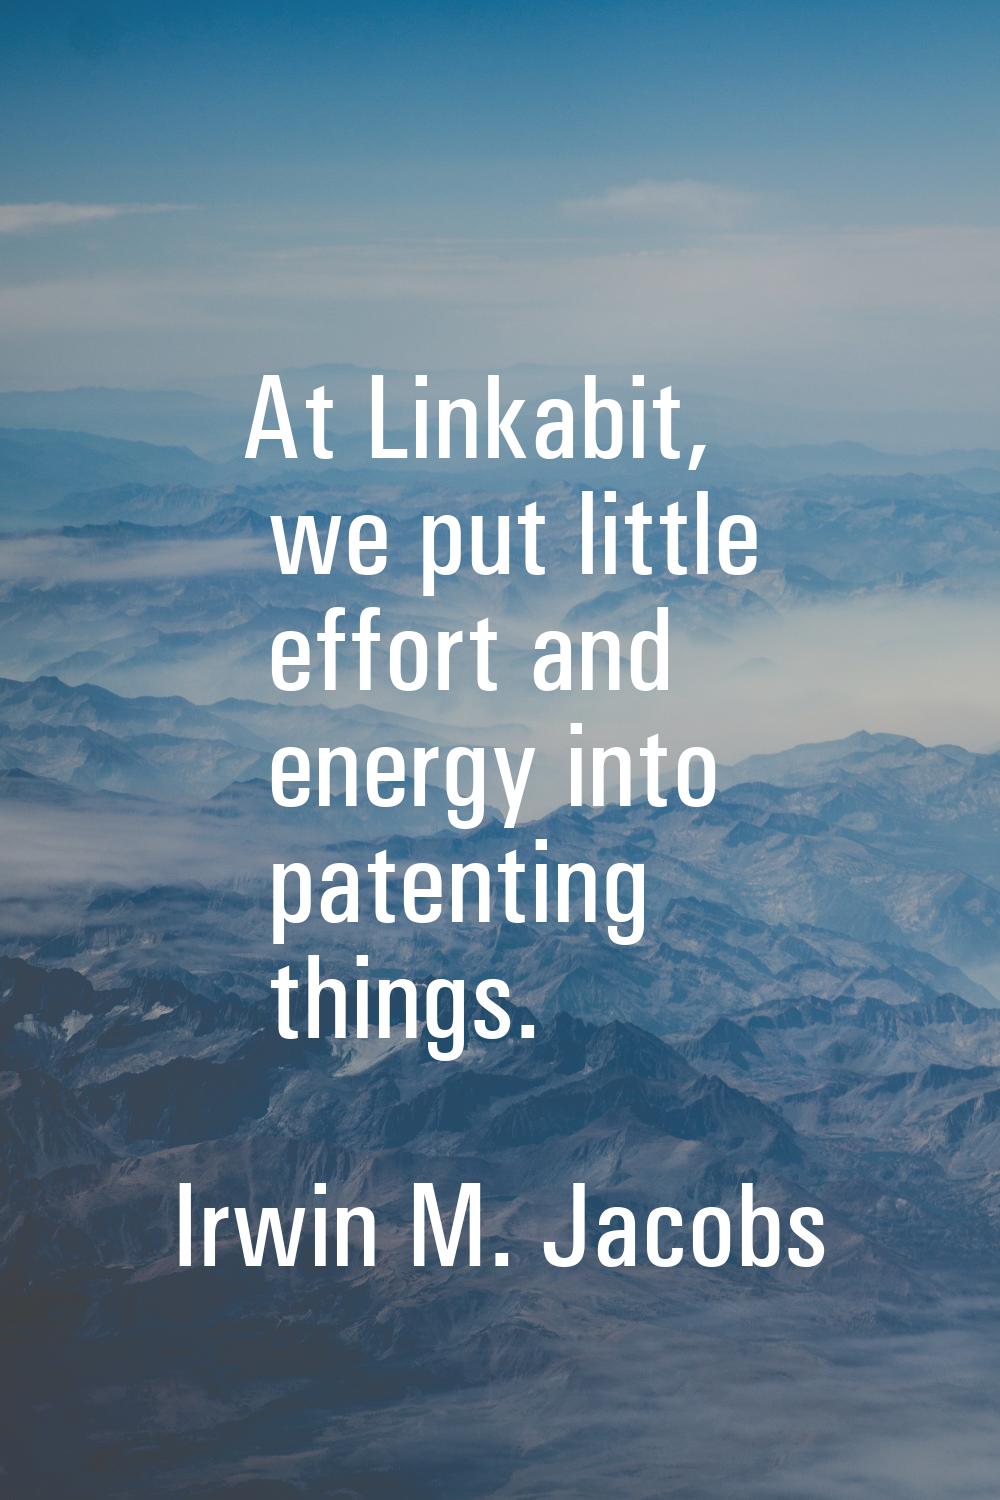 At Linkabit, we put little effort and energy into patenting things.